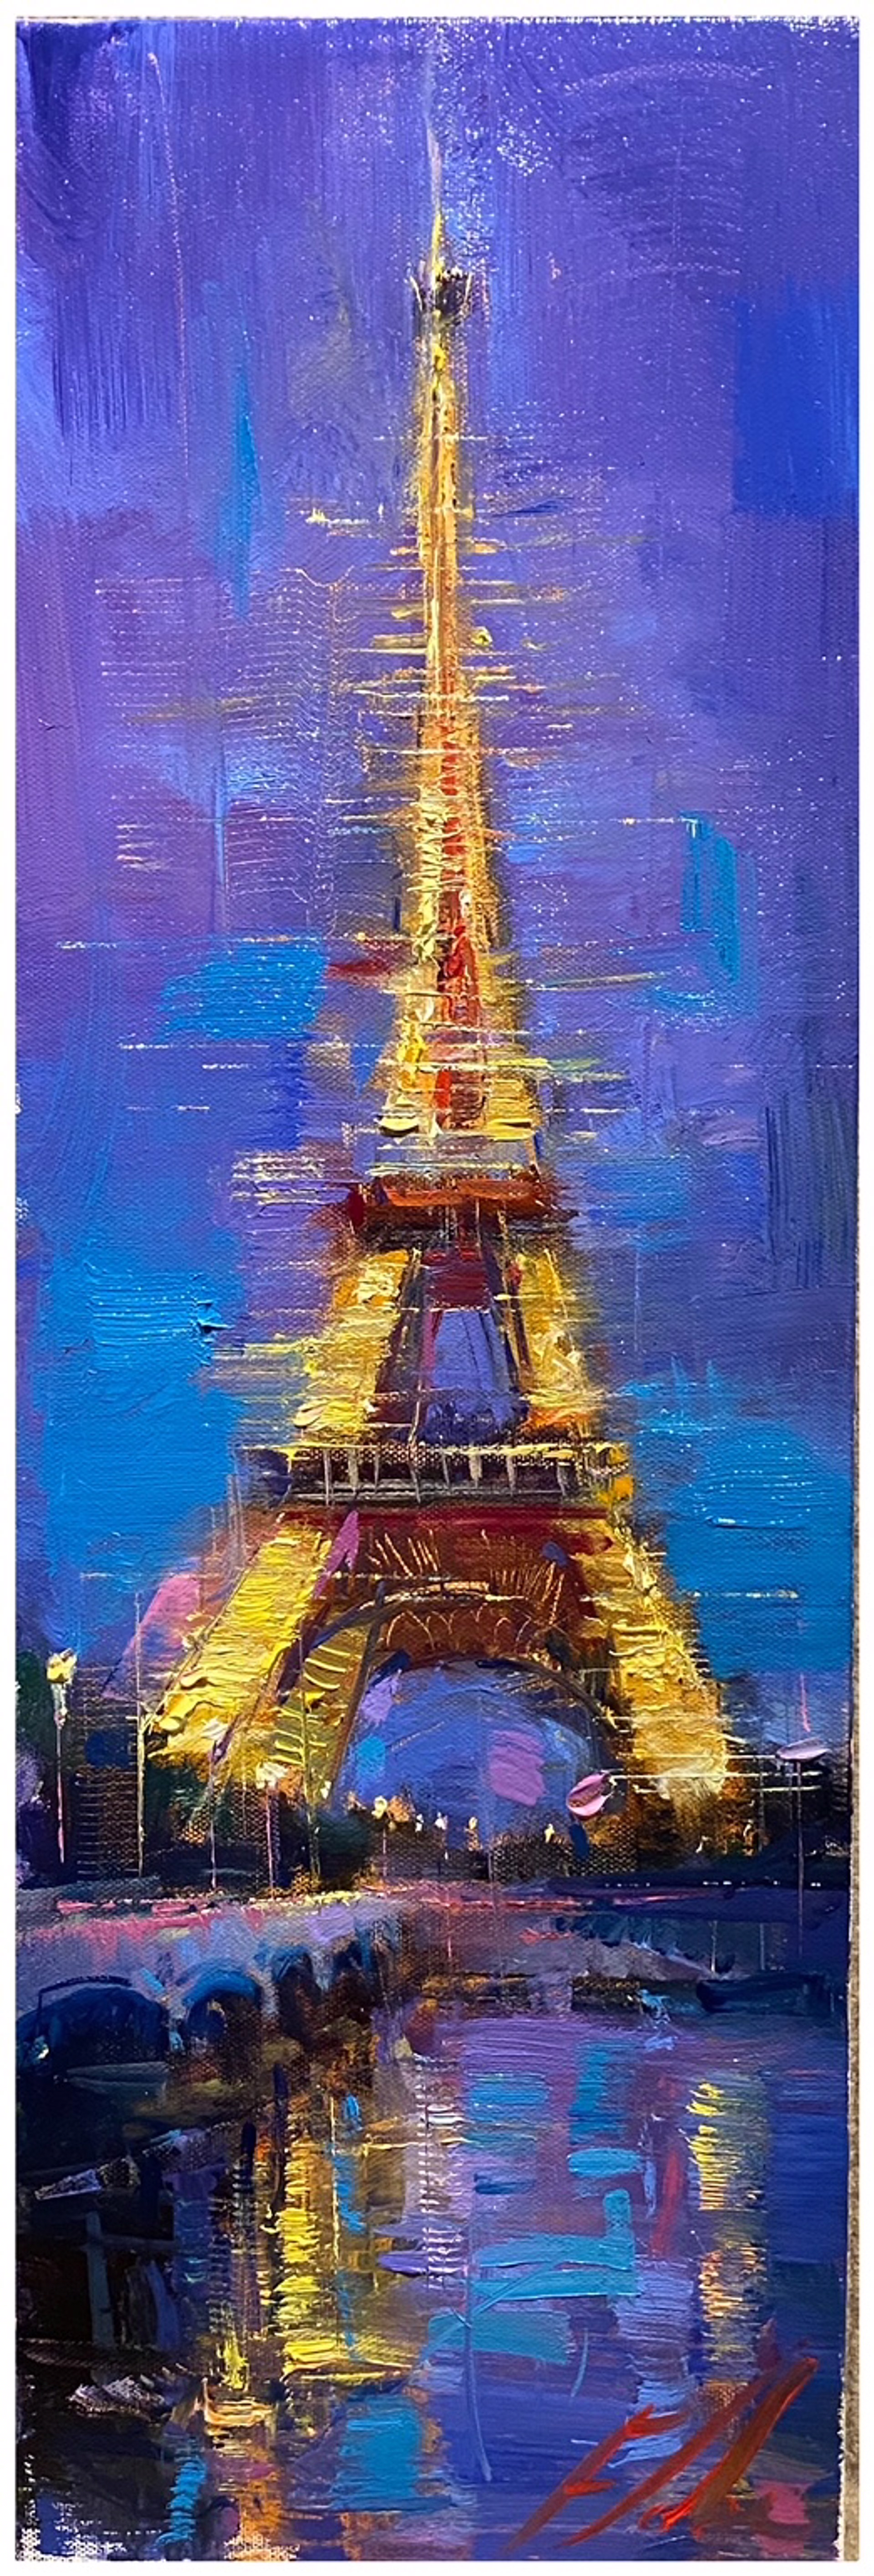 Made at show I (Paris) by Michael Flohr